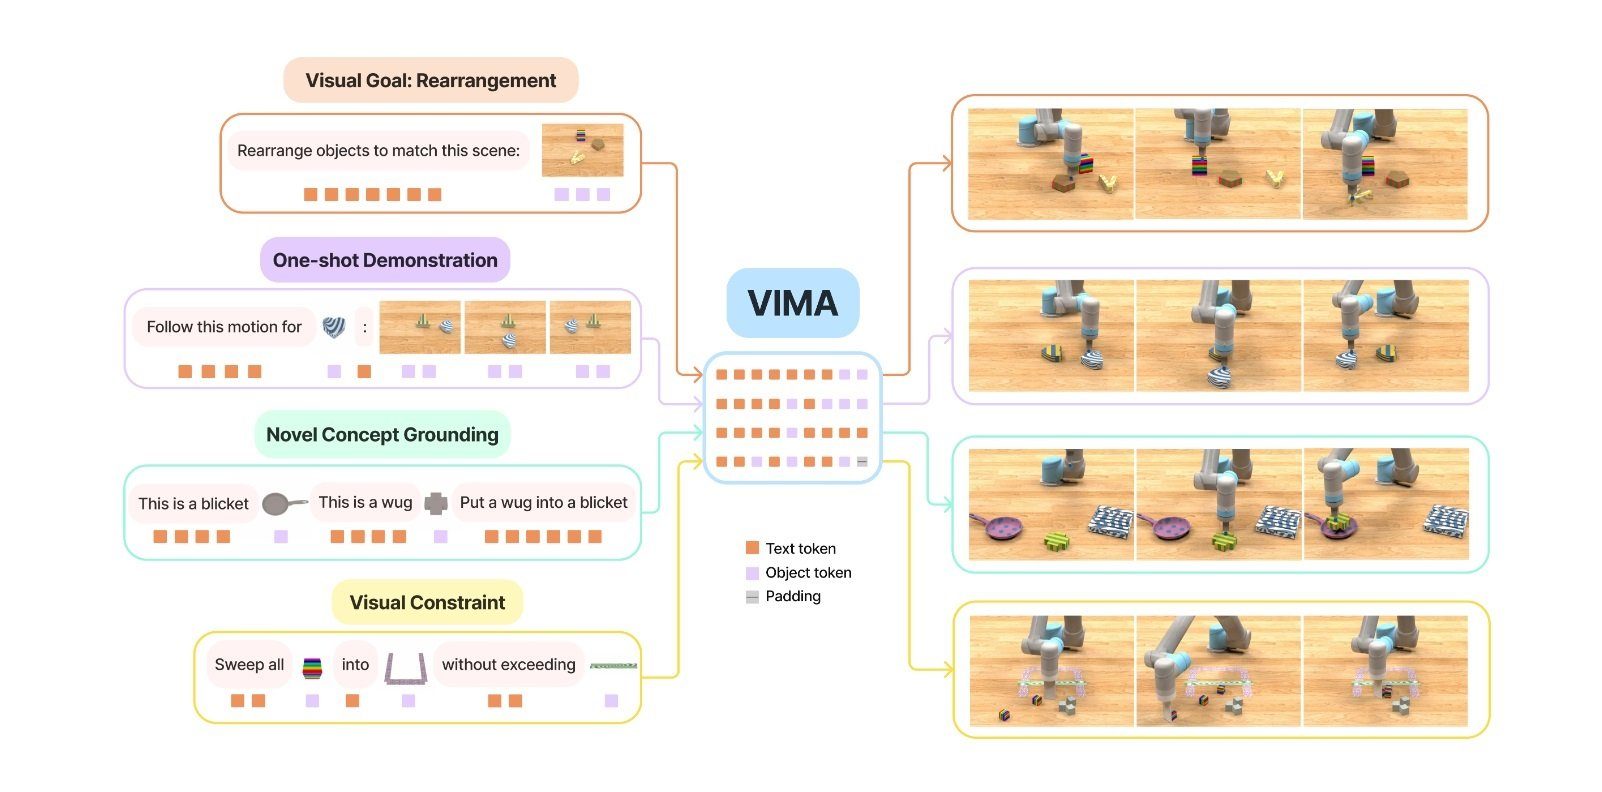 An infographic showing the VIMA model's process for robotic task execution, including goal visualization, one-shot demonstration, concept grounding, visual constraints, and the robot arm performing the tasks.